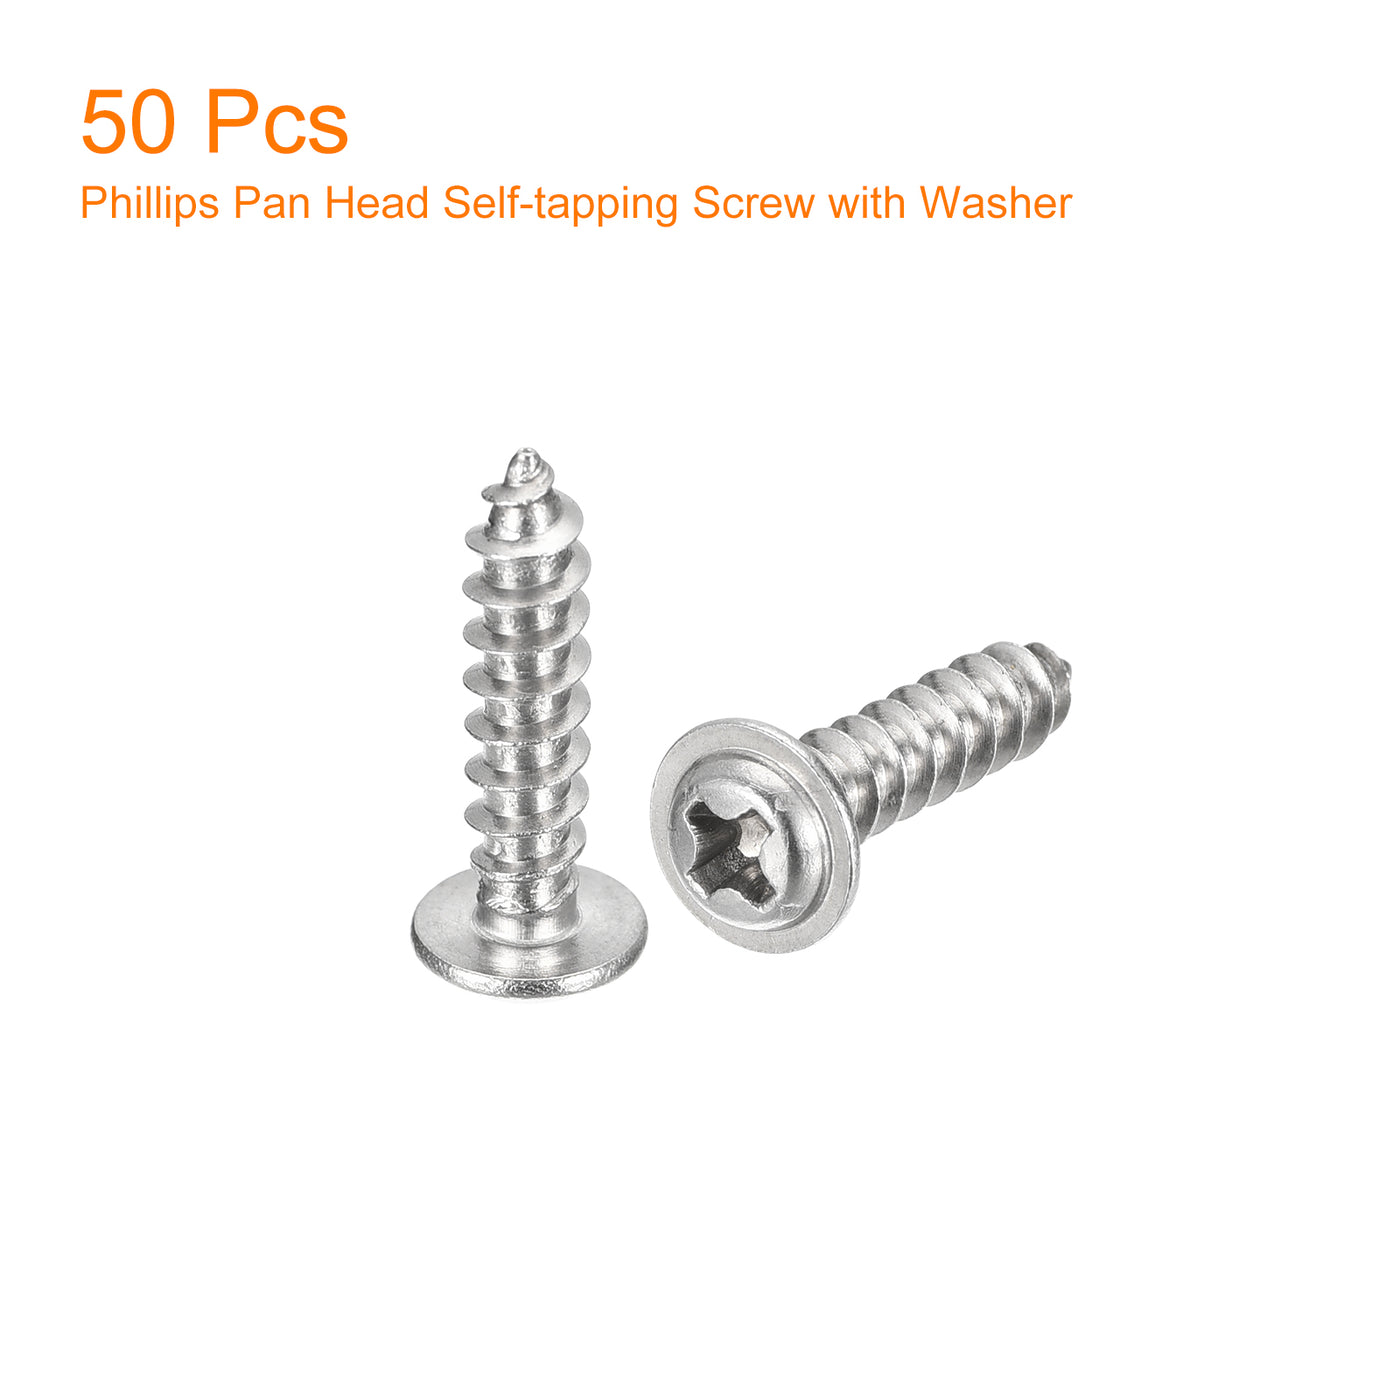 uxcell Uxcell ST4x16mm Phillips Pan Head Self-tapping Screw with Washer, 50pcs - 304 Stainless Steel Wood Screw Full Thread (Silver)